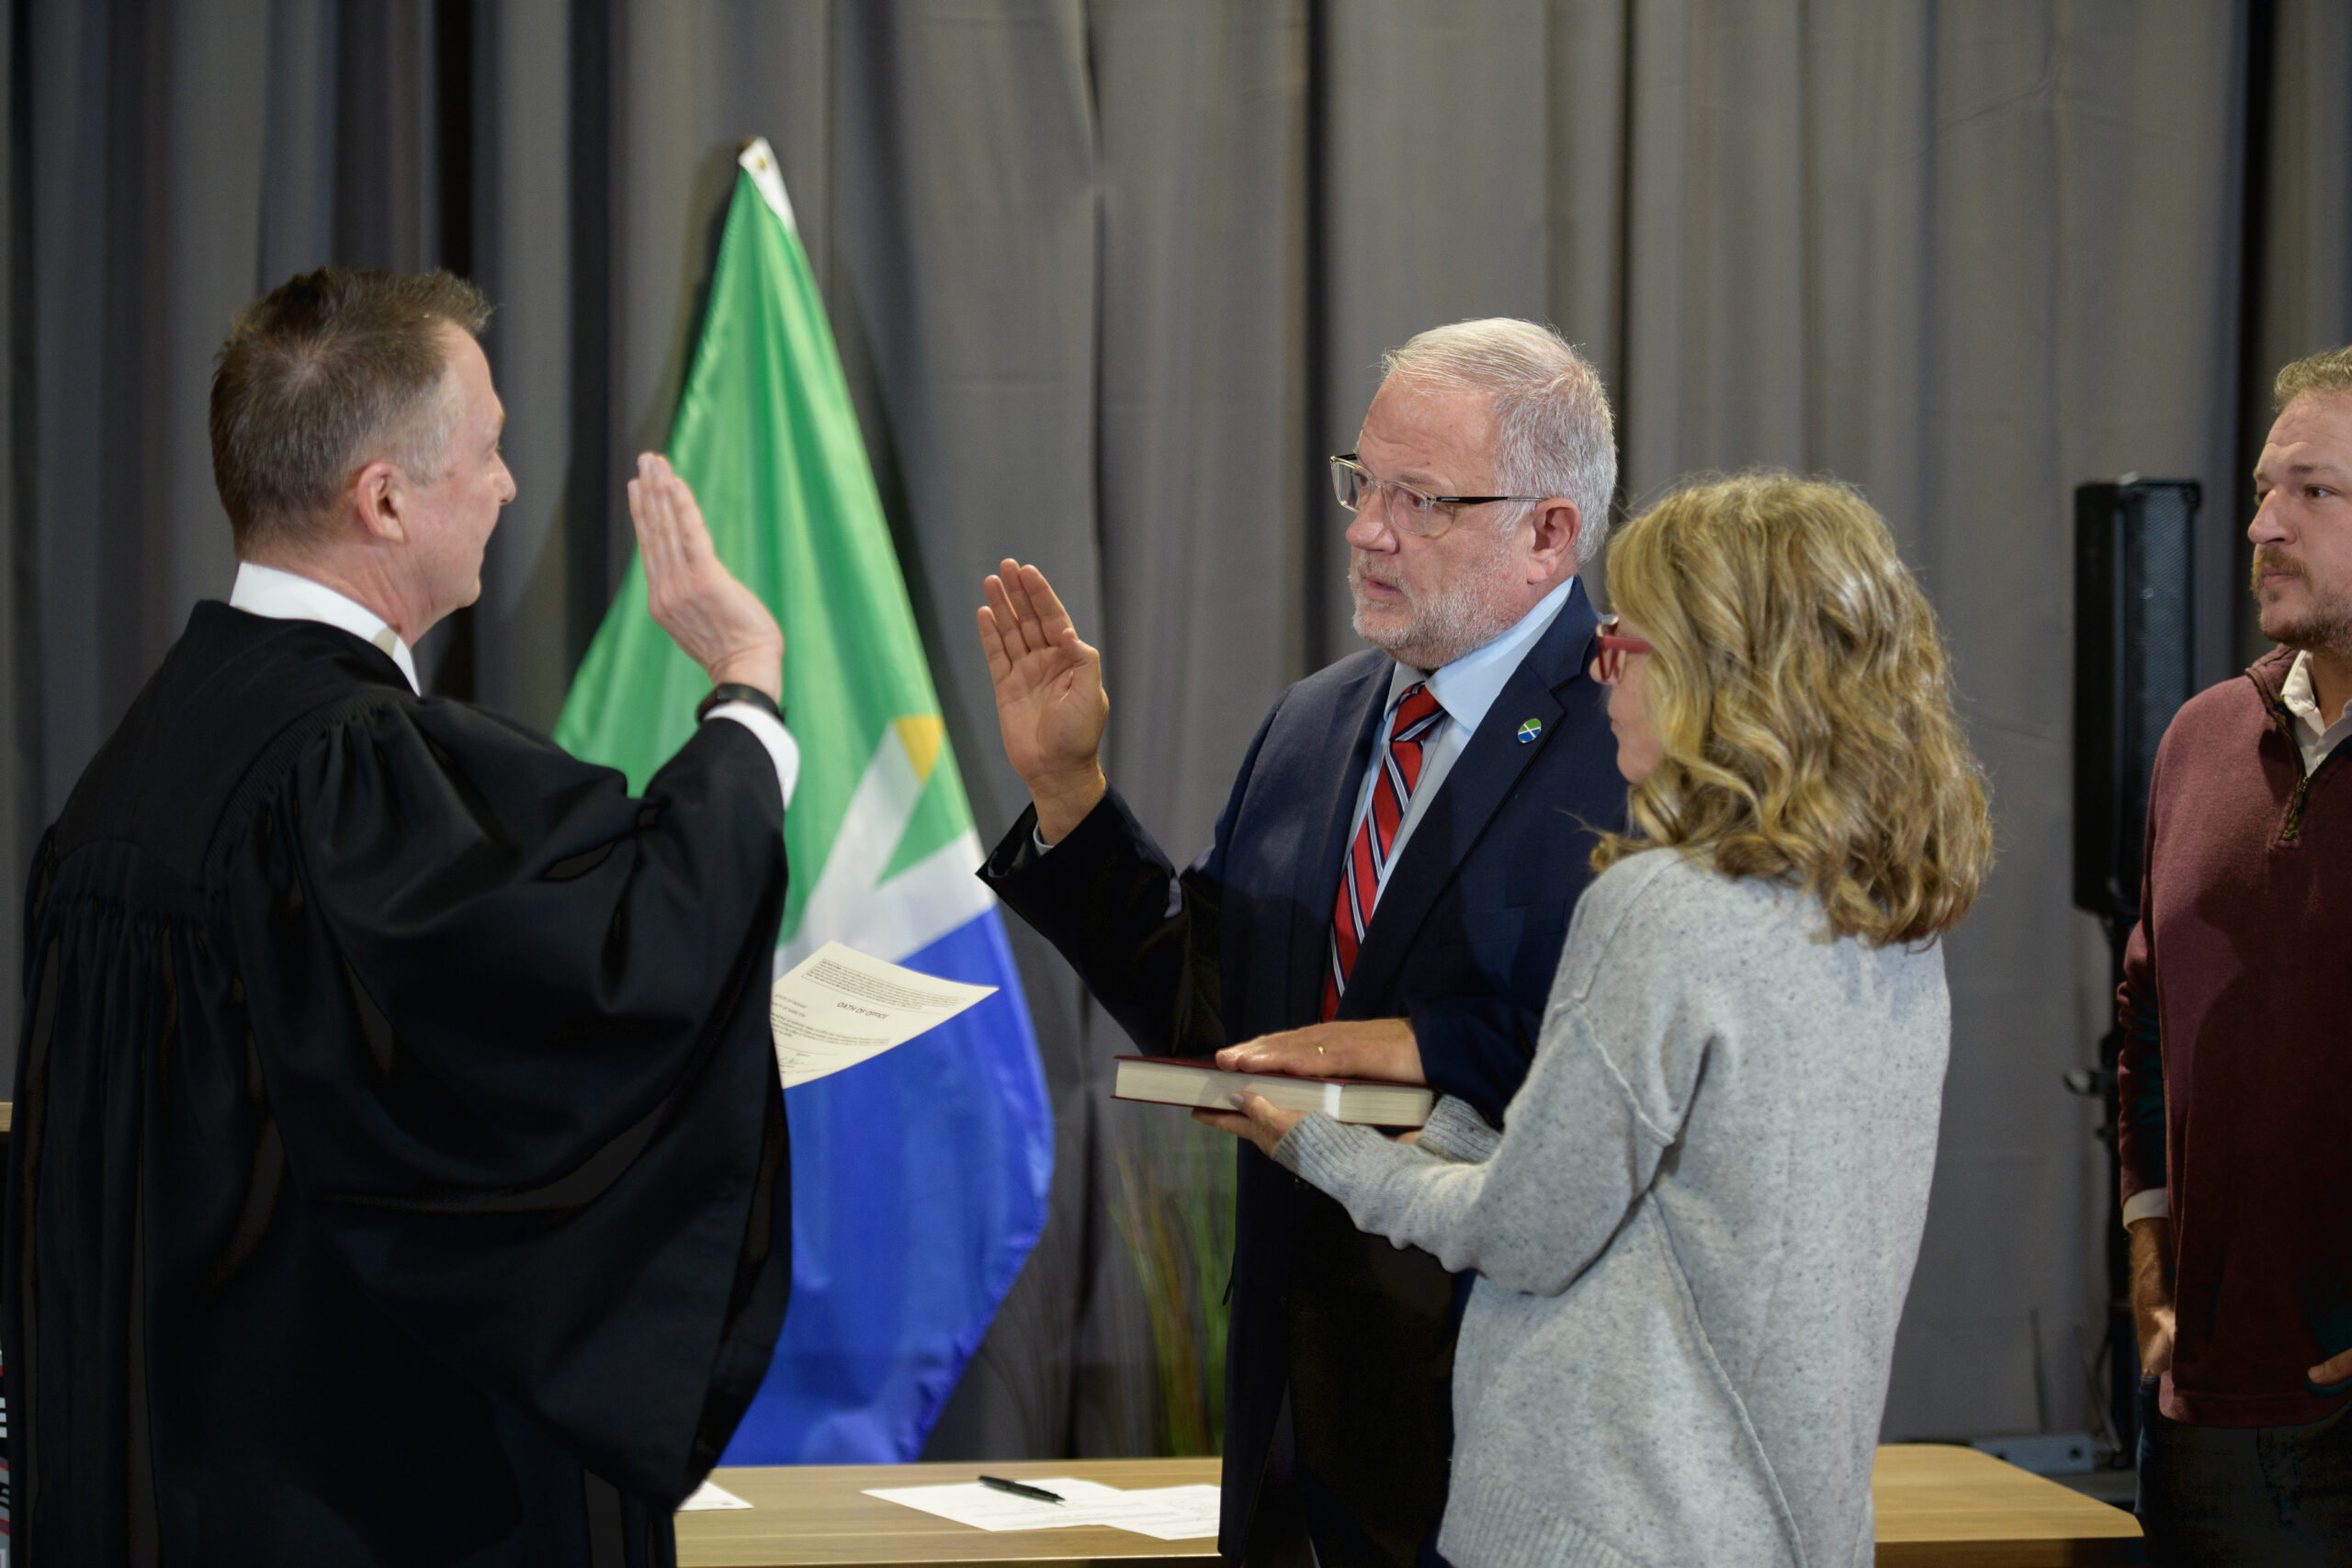 councilors swearing in ceremony